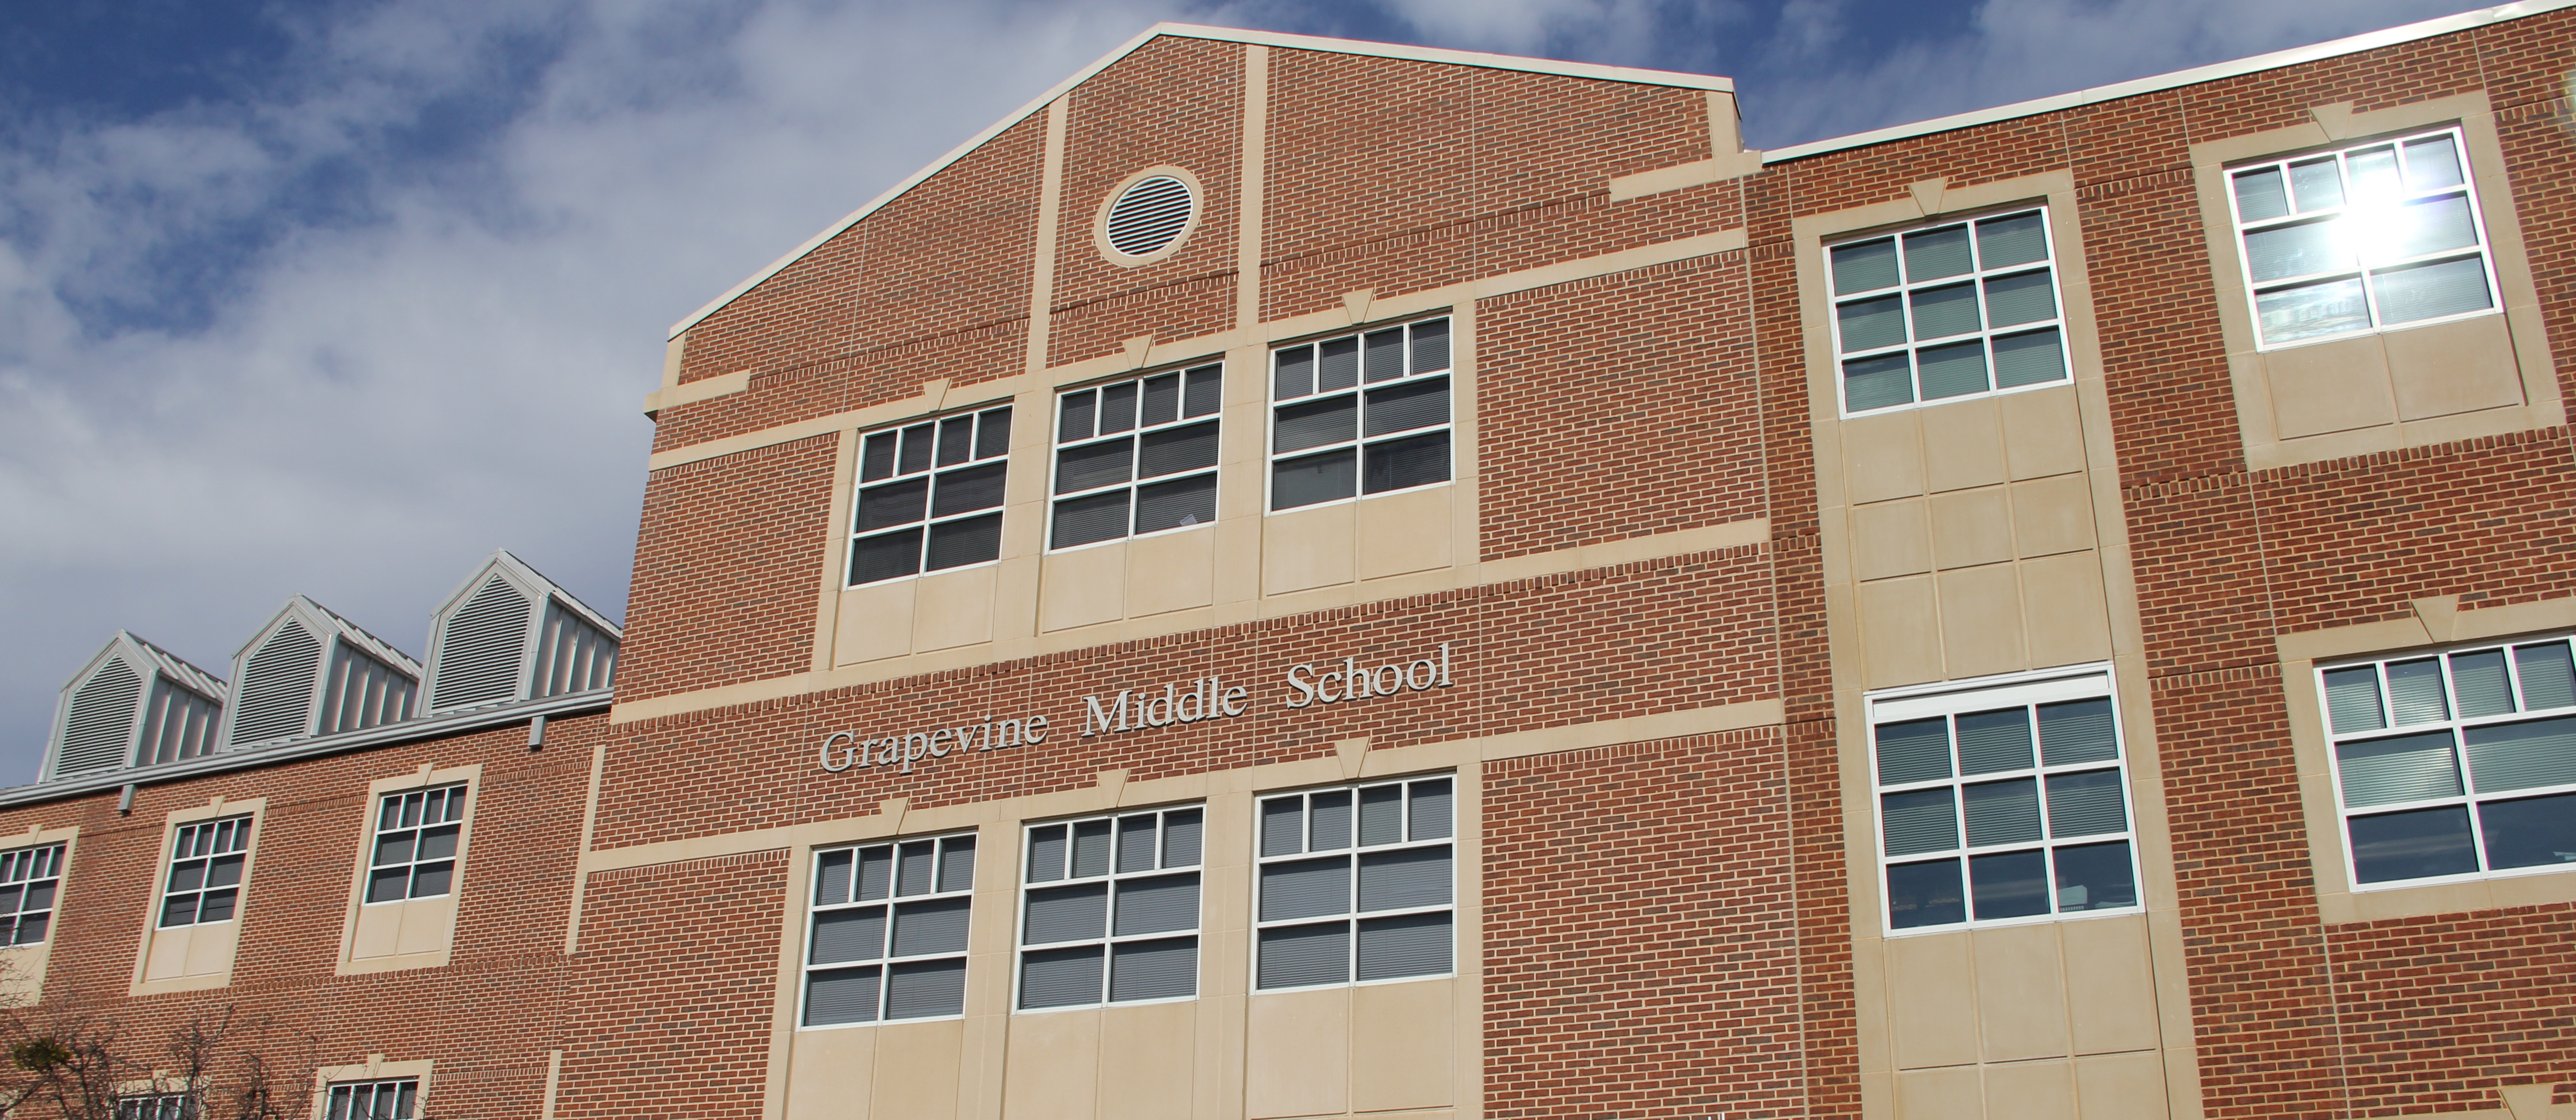 Picture of the front of Grapevine Middle School building. 